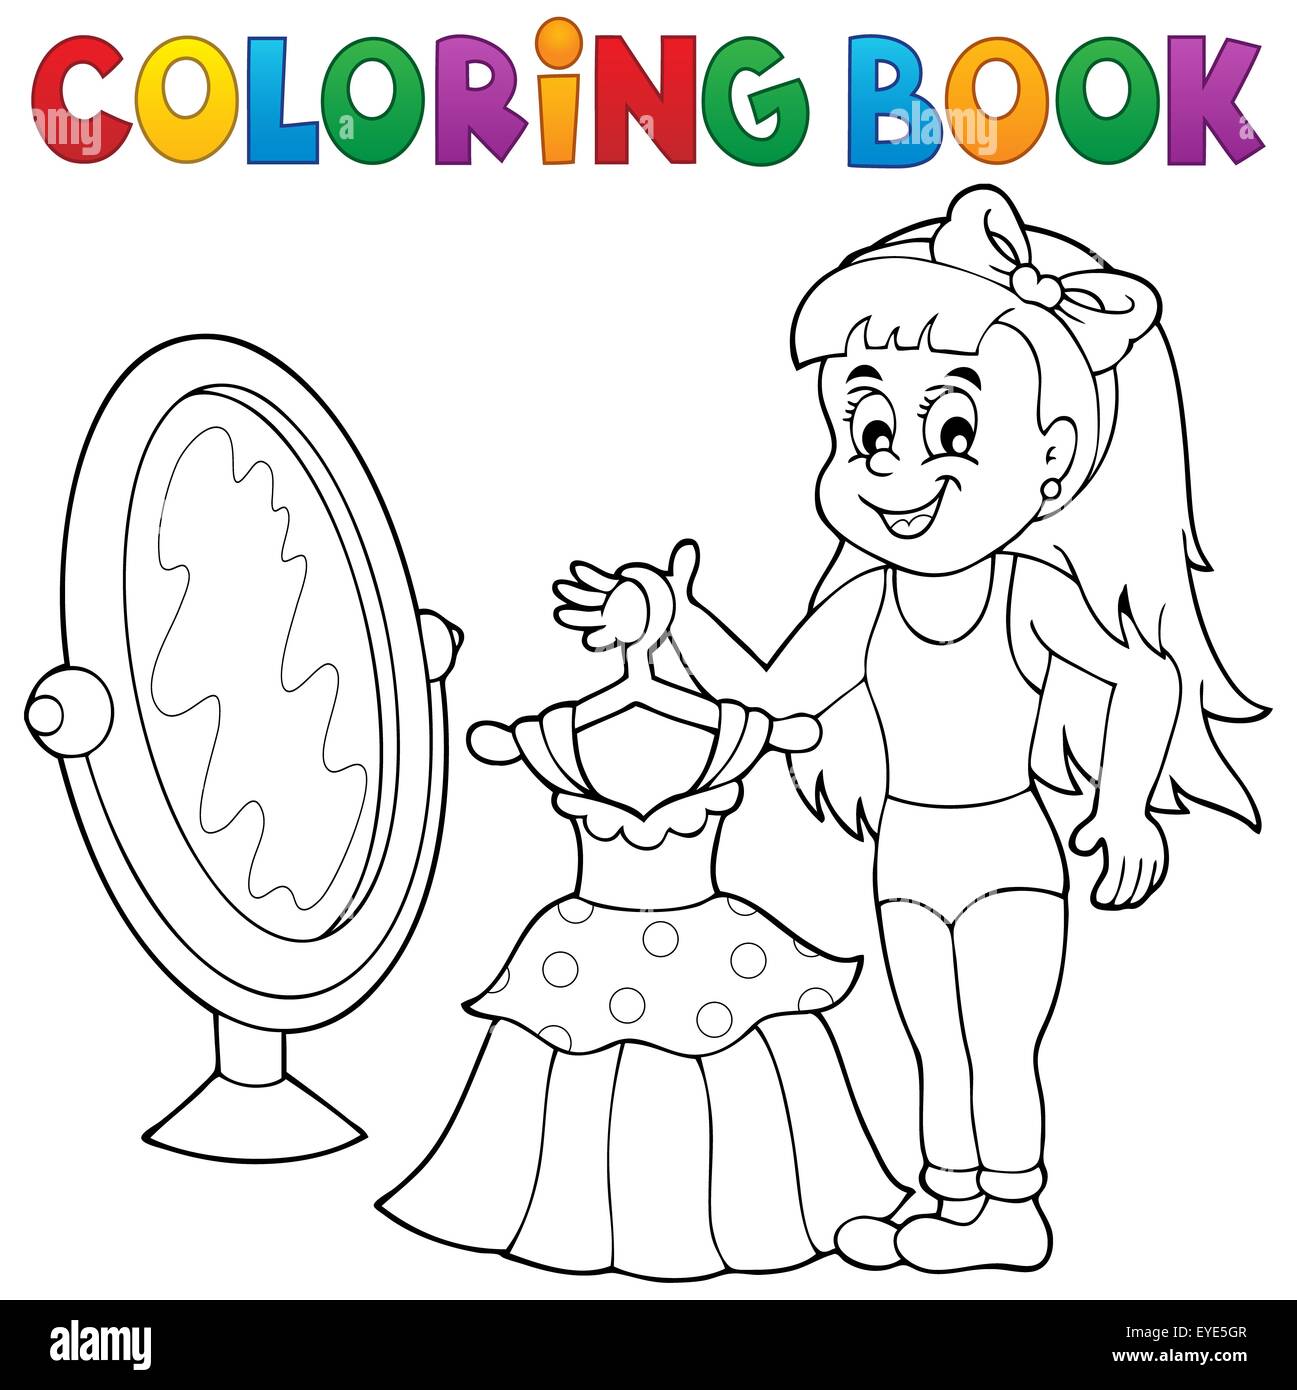 Coloring book girl with dress theme - picture illustration Stock Photo -  Alamy